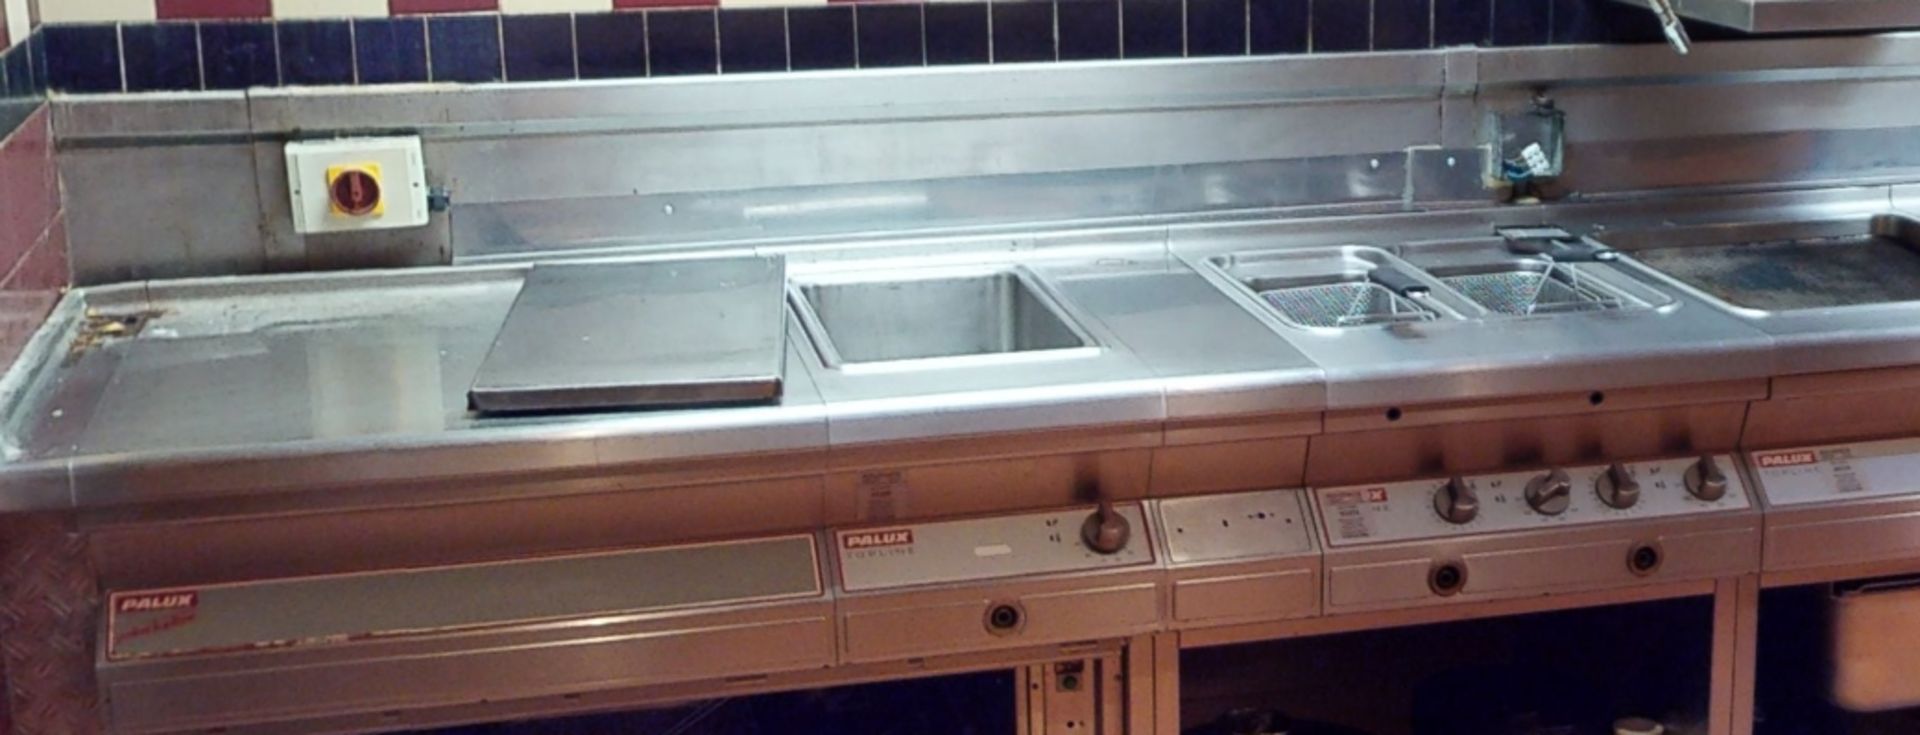 1 x PALUX TOPLINE Cooking Station - Approx 8m Length - Includes 13 units - Gas and Electric Powered - Image 4 of 14